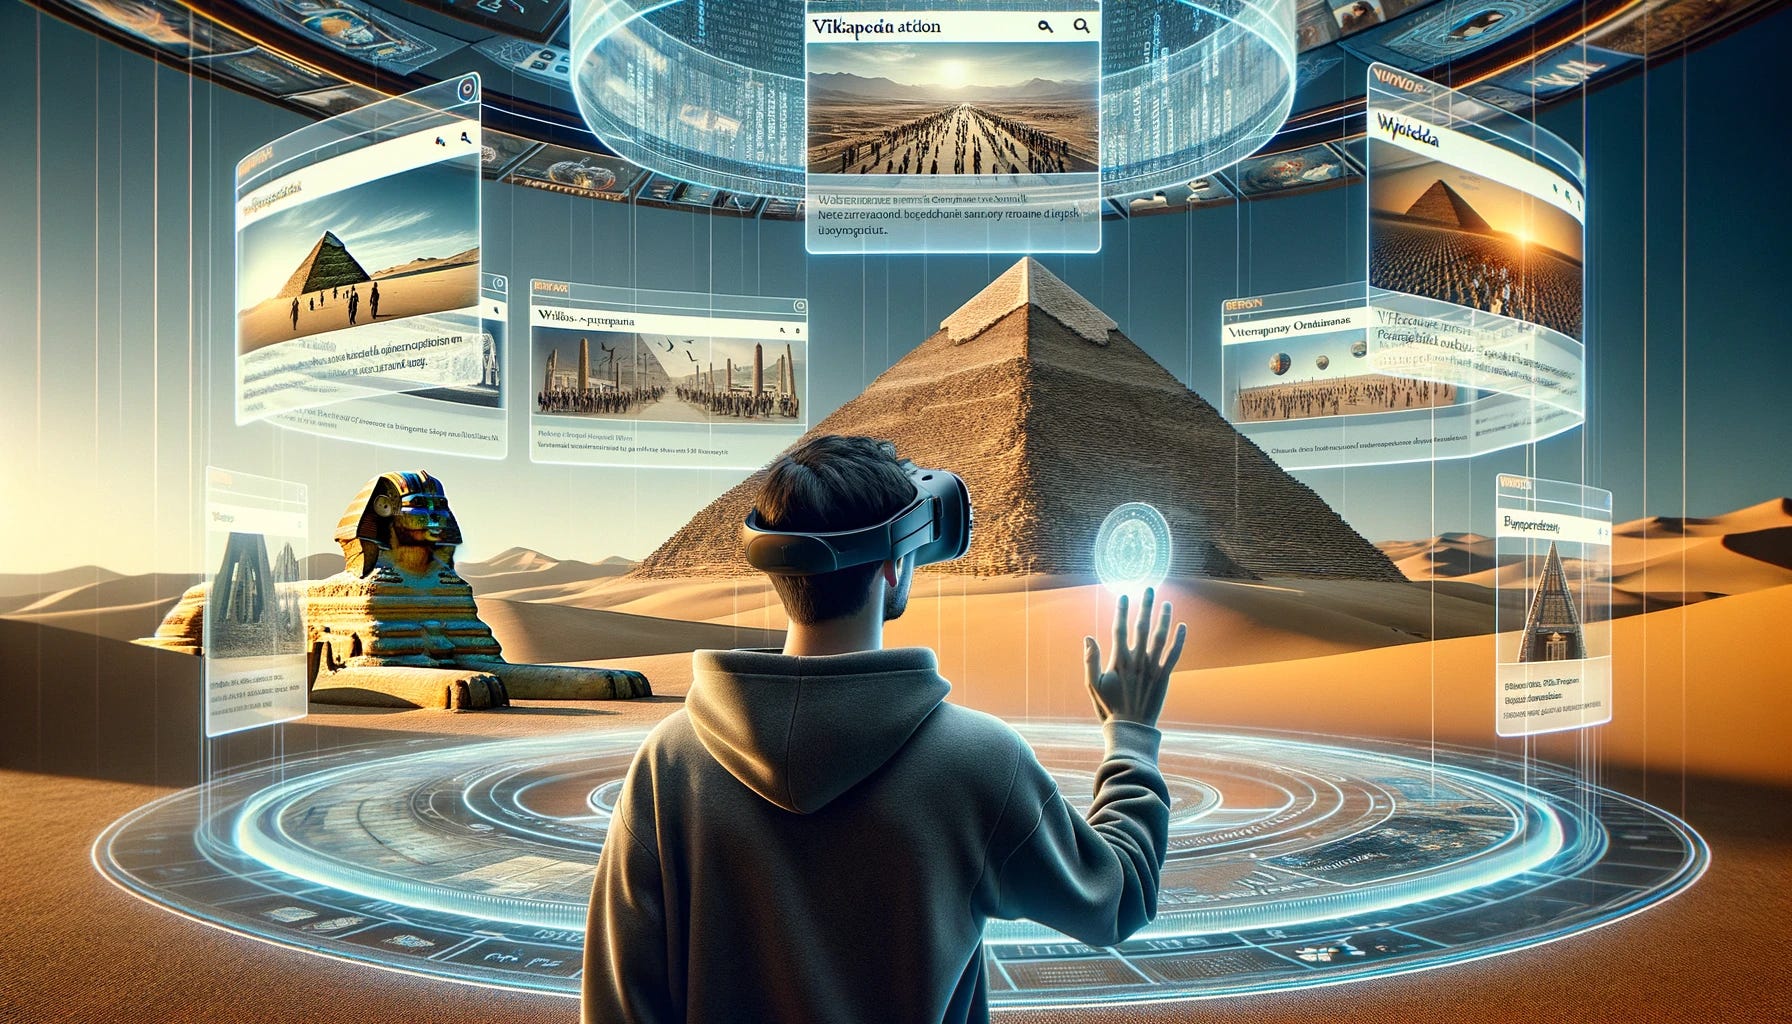 Photo set inside a sleek, futuristic room with floating holographic screens displaying various Wikipedia articles. The individual with the VR headset reaches out, selecting the pyramid article. The surrounding holograms fade, replaced by the vast desert landscape of Egypt, the iconic Sphinx, and the towering pyramids. Ambient sounds of ancient Egypt, like bustling marketplaces and prayers, echo in the background.